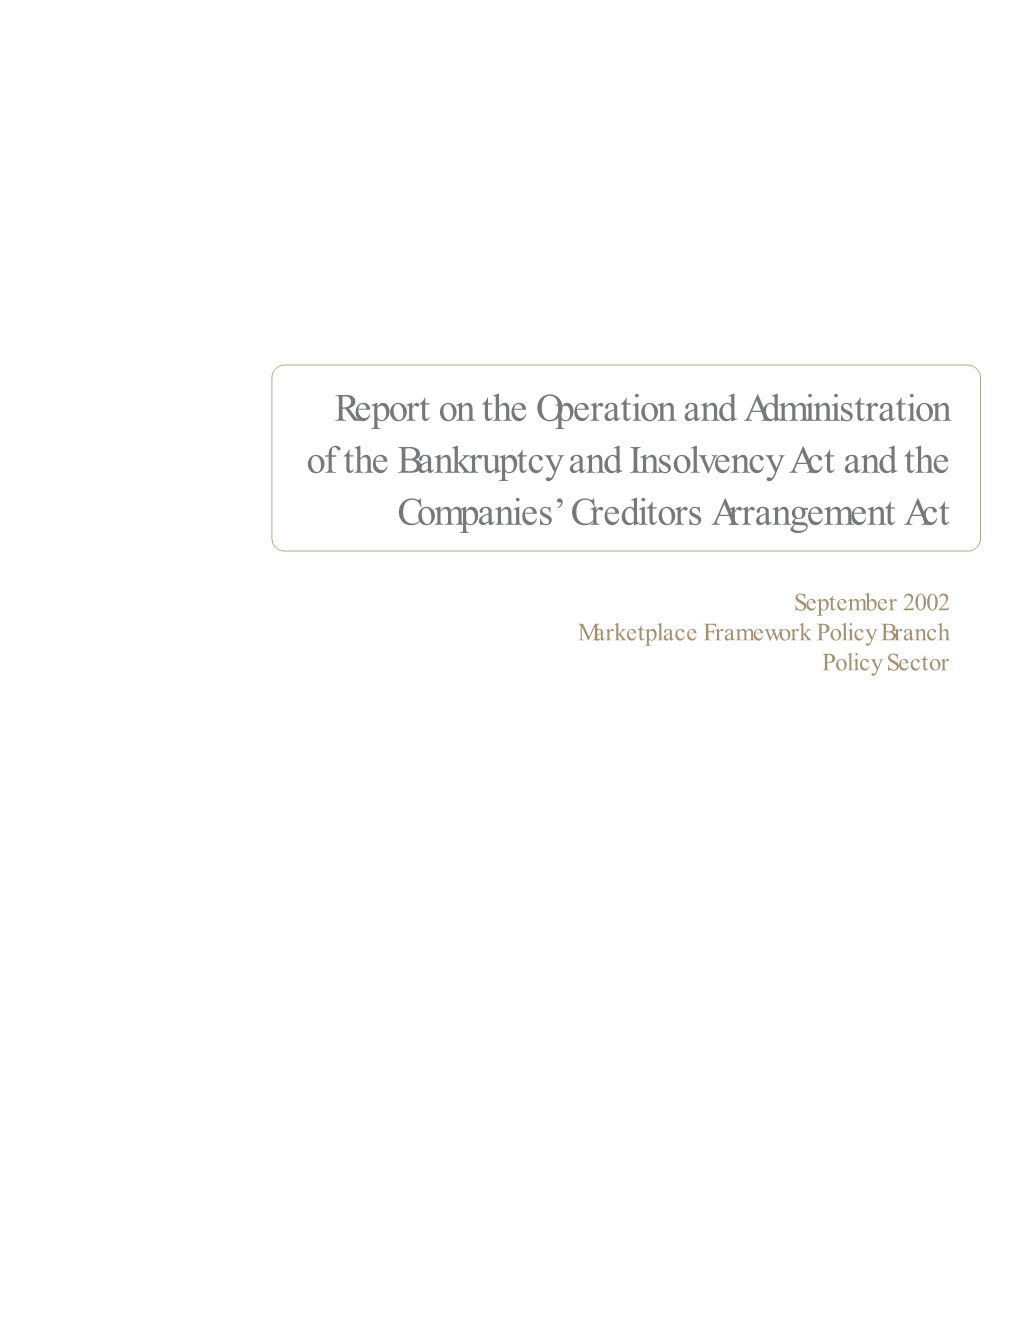 Report on the Operation and Administration of the Bankruptcy and Insolvency Act and the Companies' Creditors Arrangement